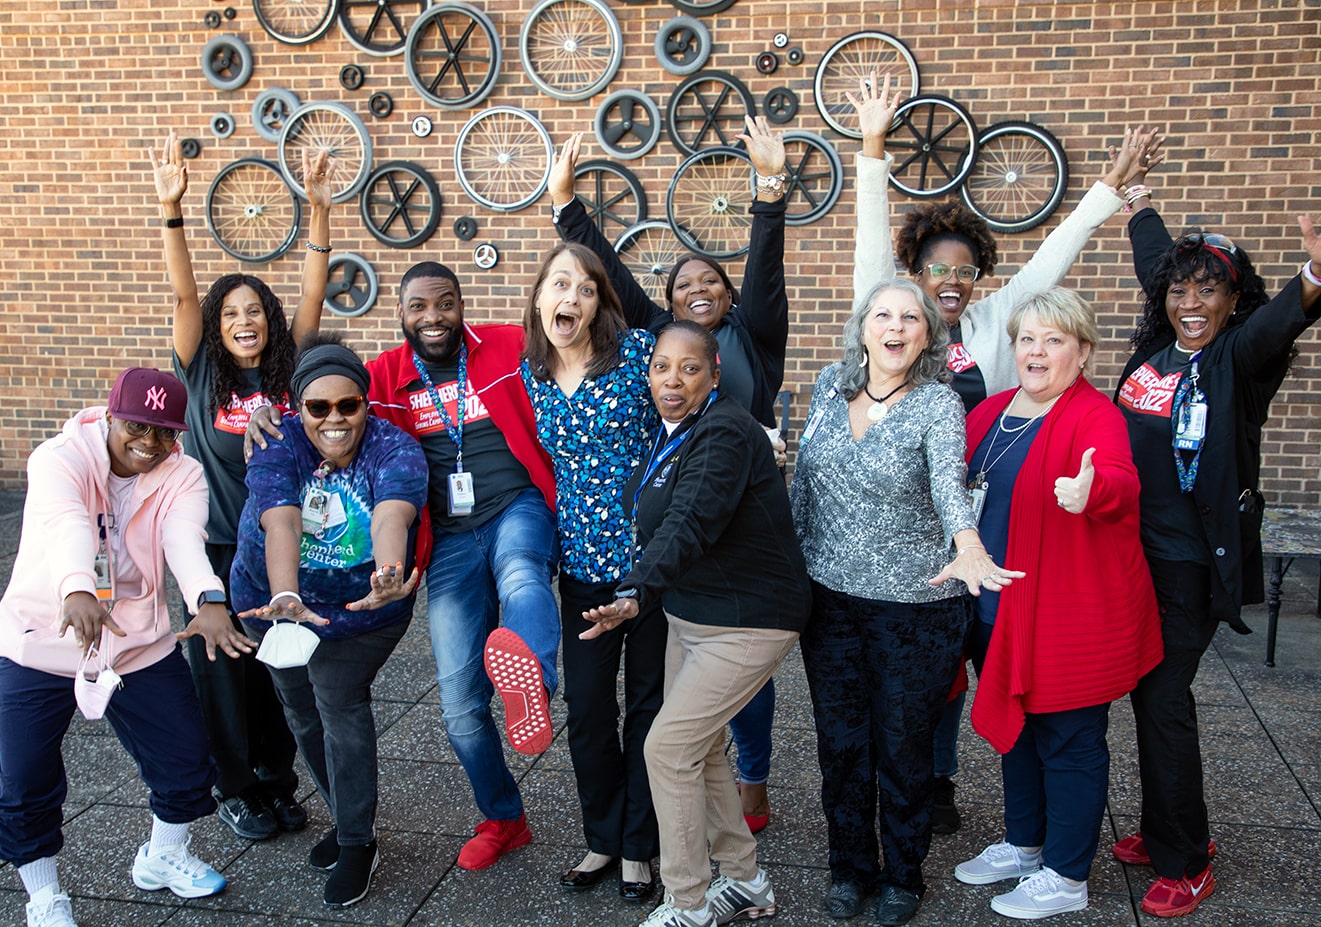 A group of coworkers strike a silly pose for a picture in front of a brick wall adorned with different types of wheels